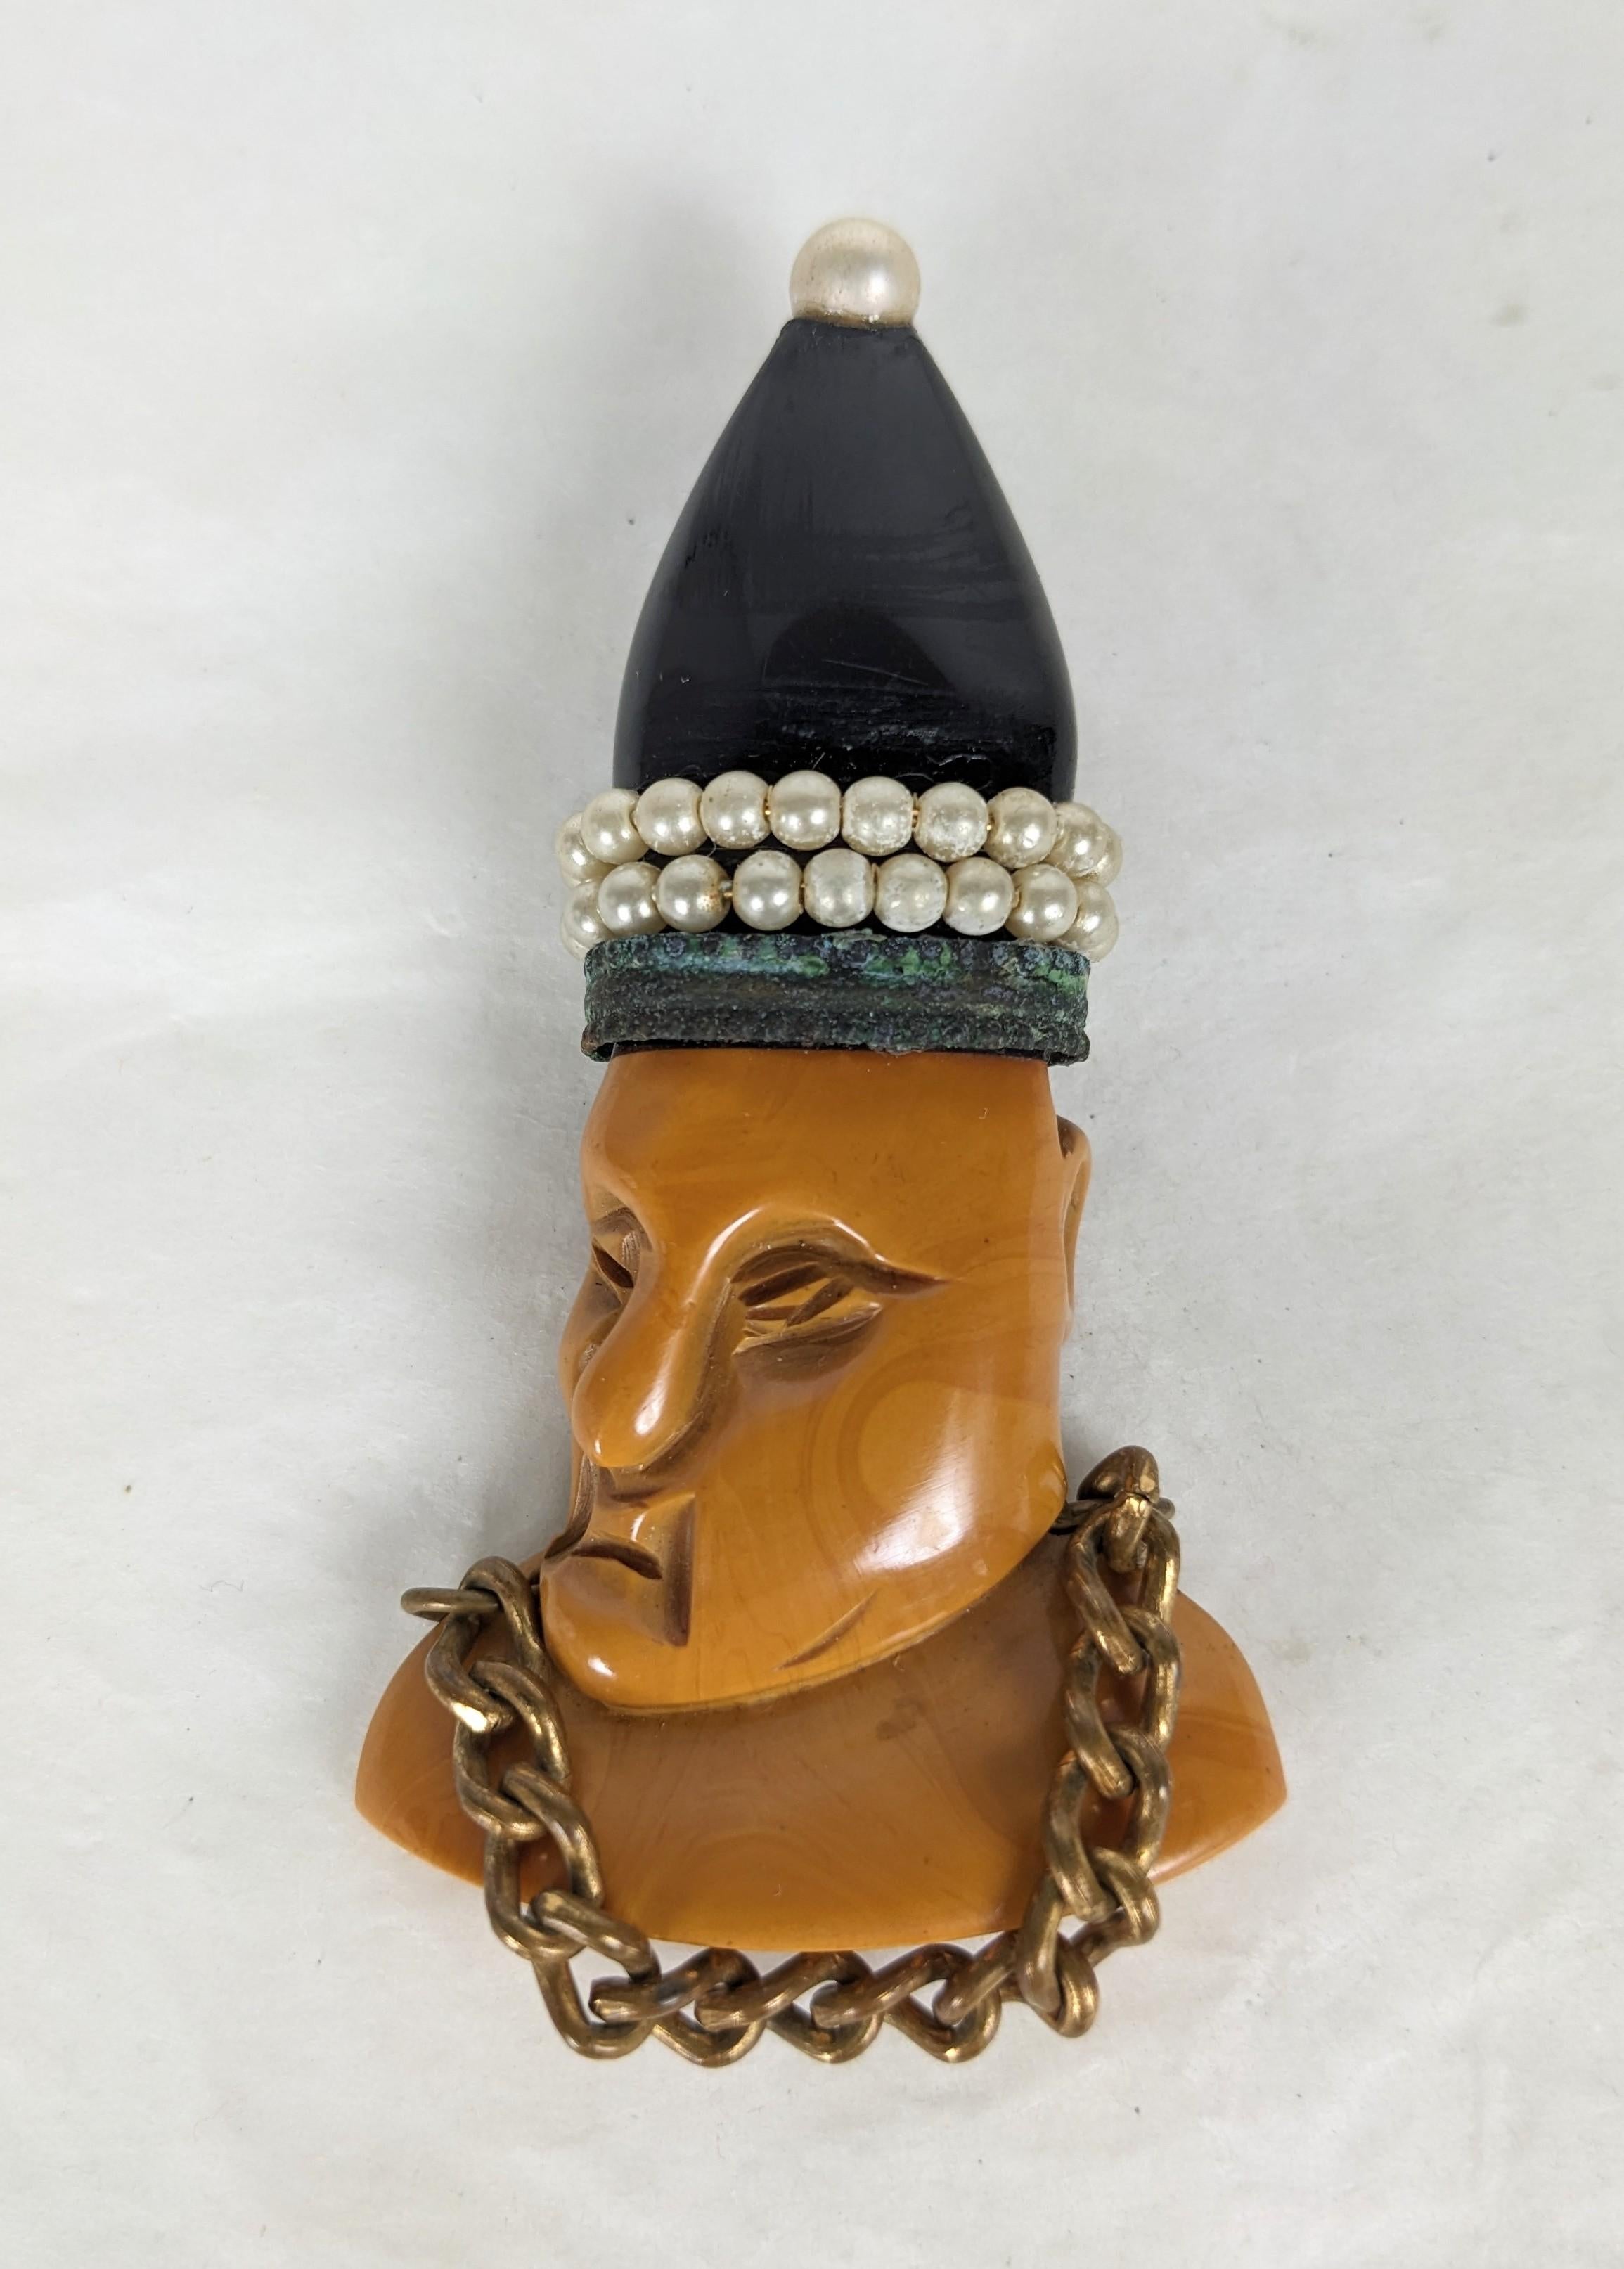 Unusual Art Deco Bakelite Figural Papal Brooch from the 1930's. Hand carved of butterscotch and black bakelite with faux pearls and chain detailing. Clip back fittings. 2.75